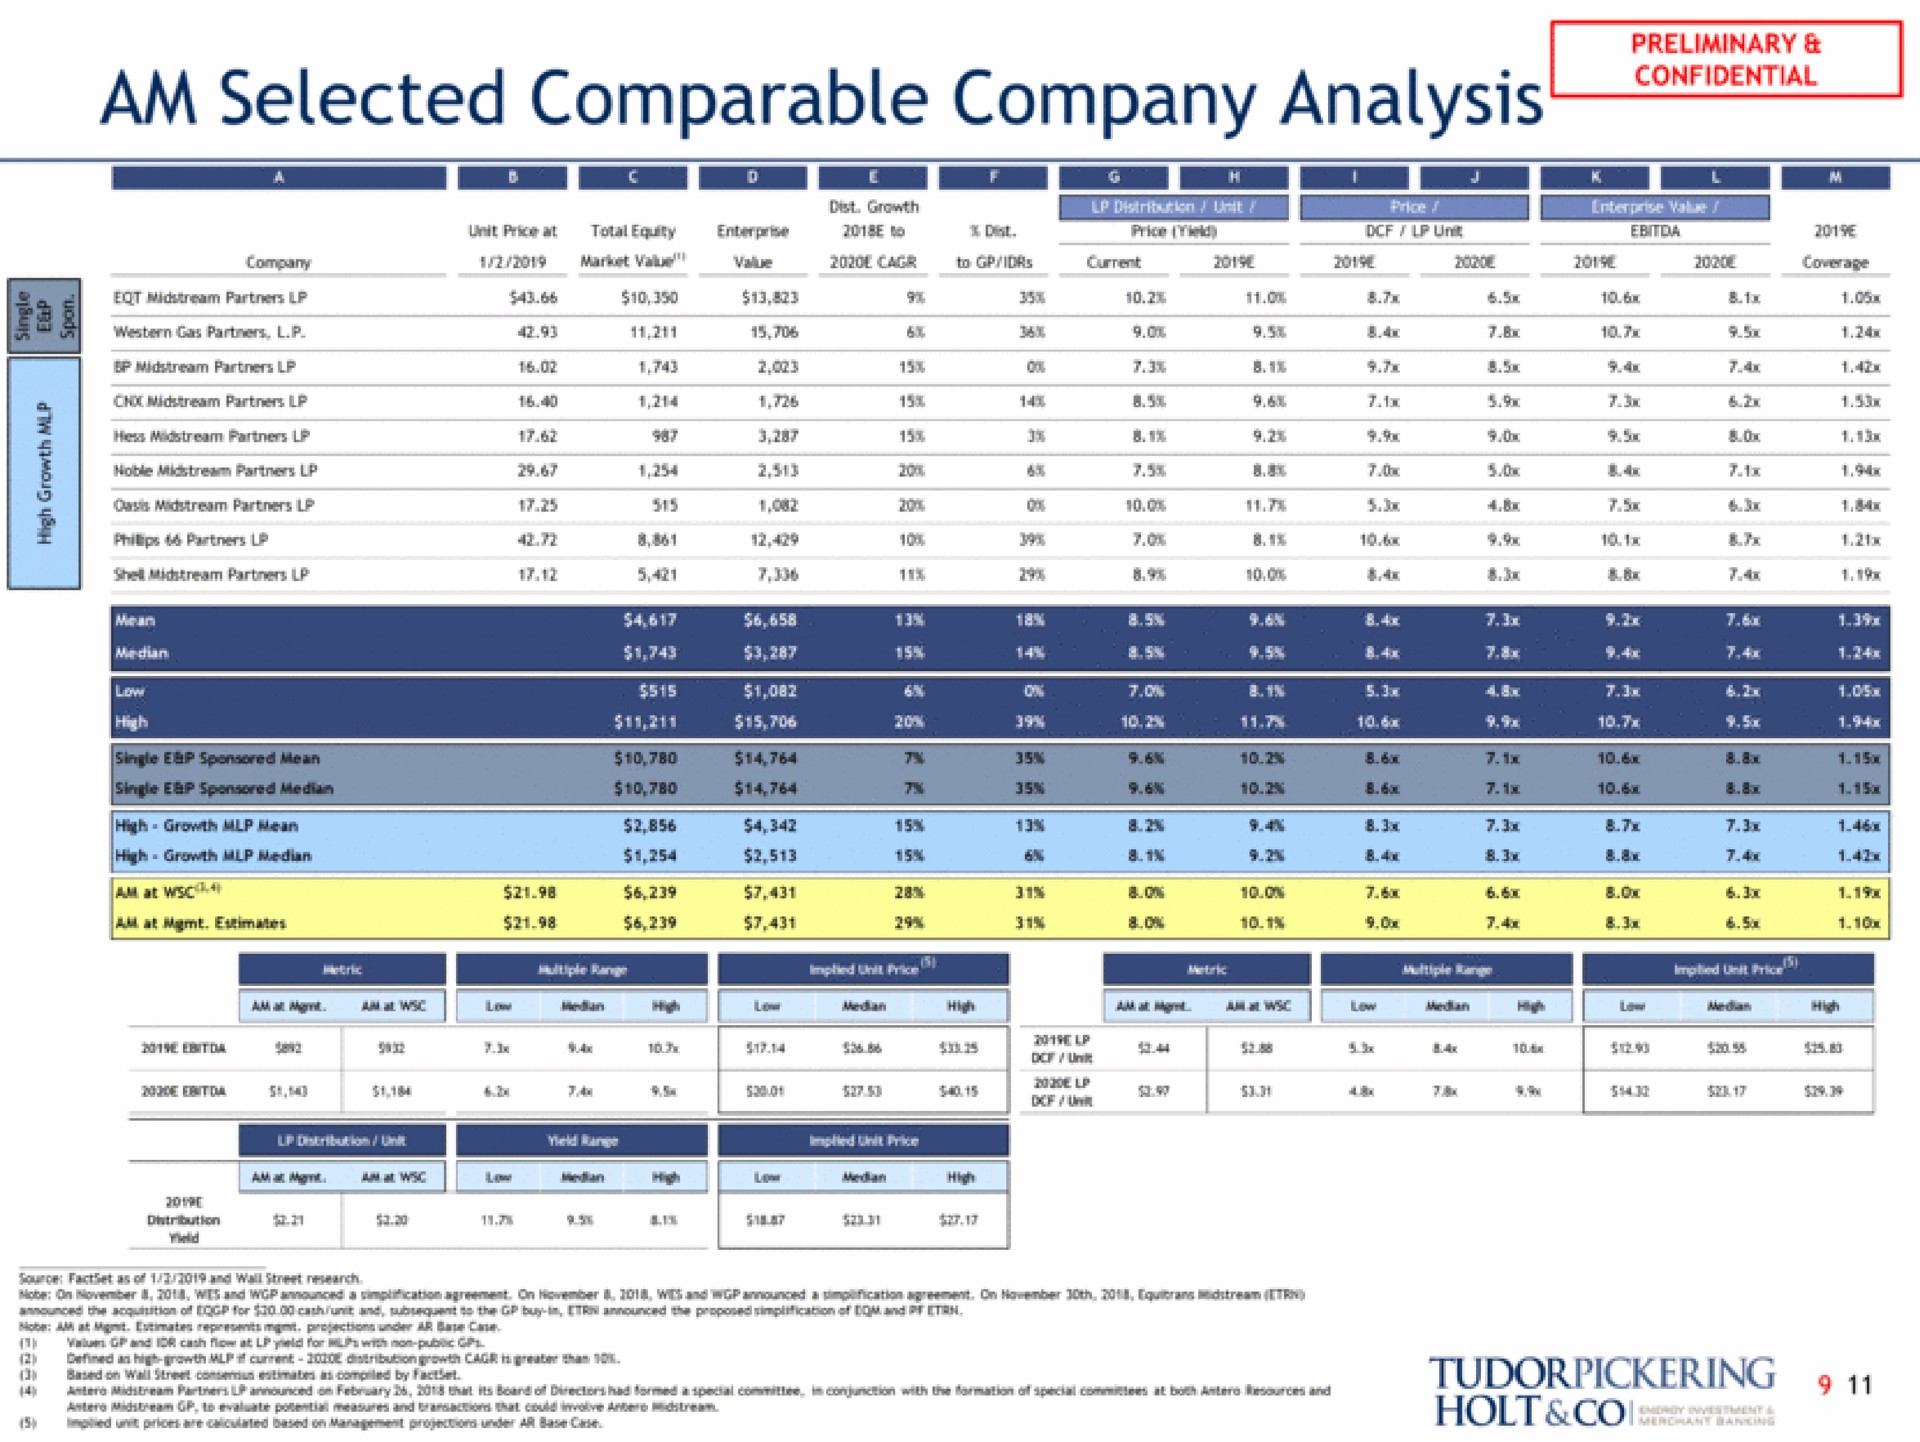 am selected comparable company analysis growth | Tudor, Pickering, Holt & Co